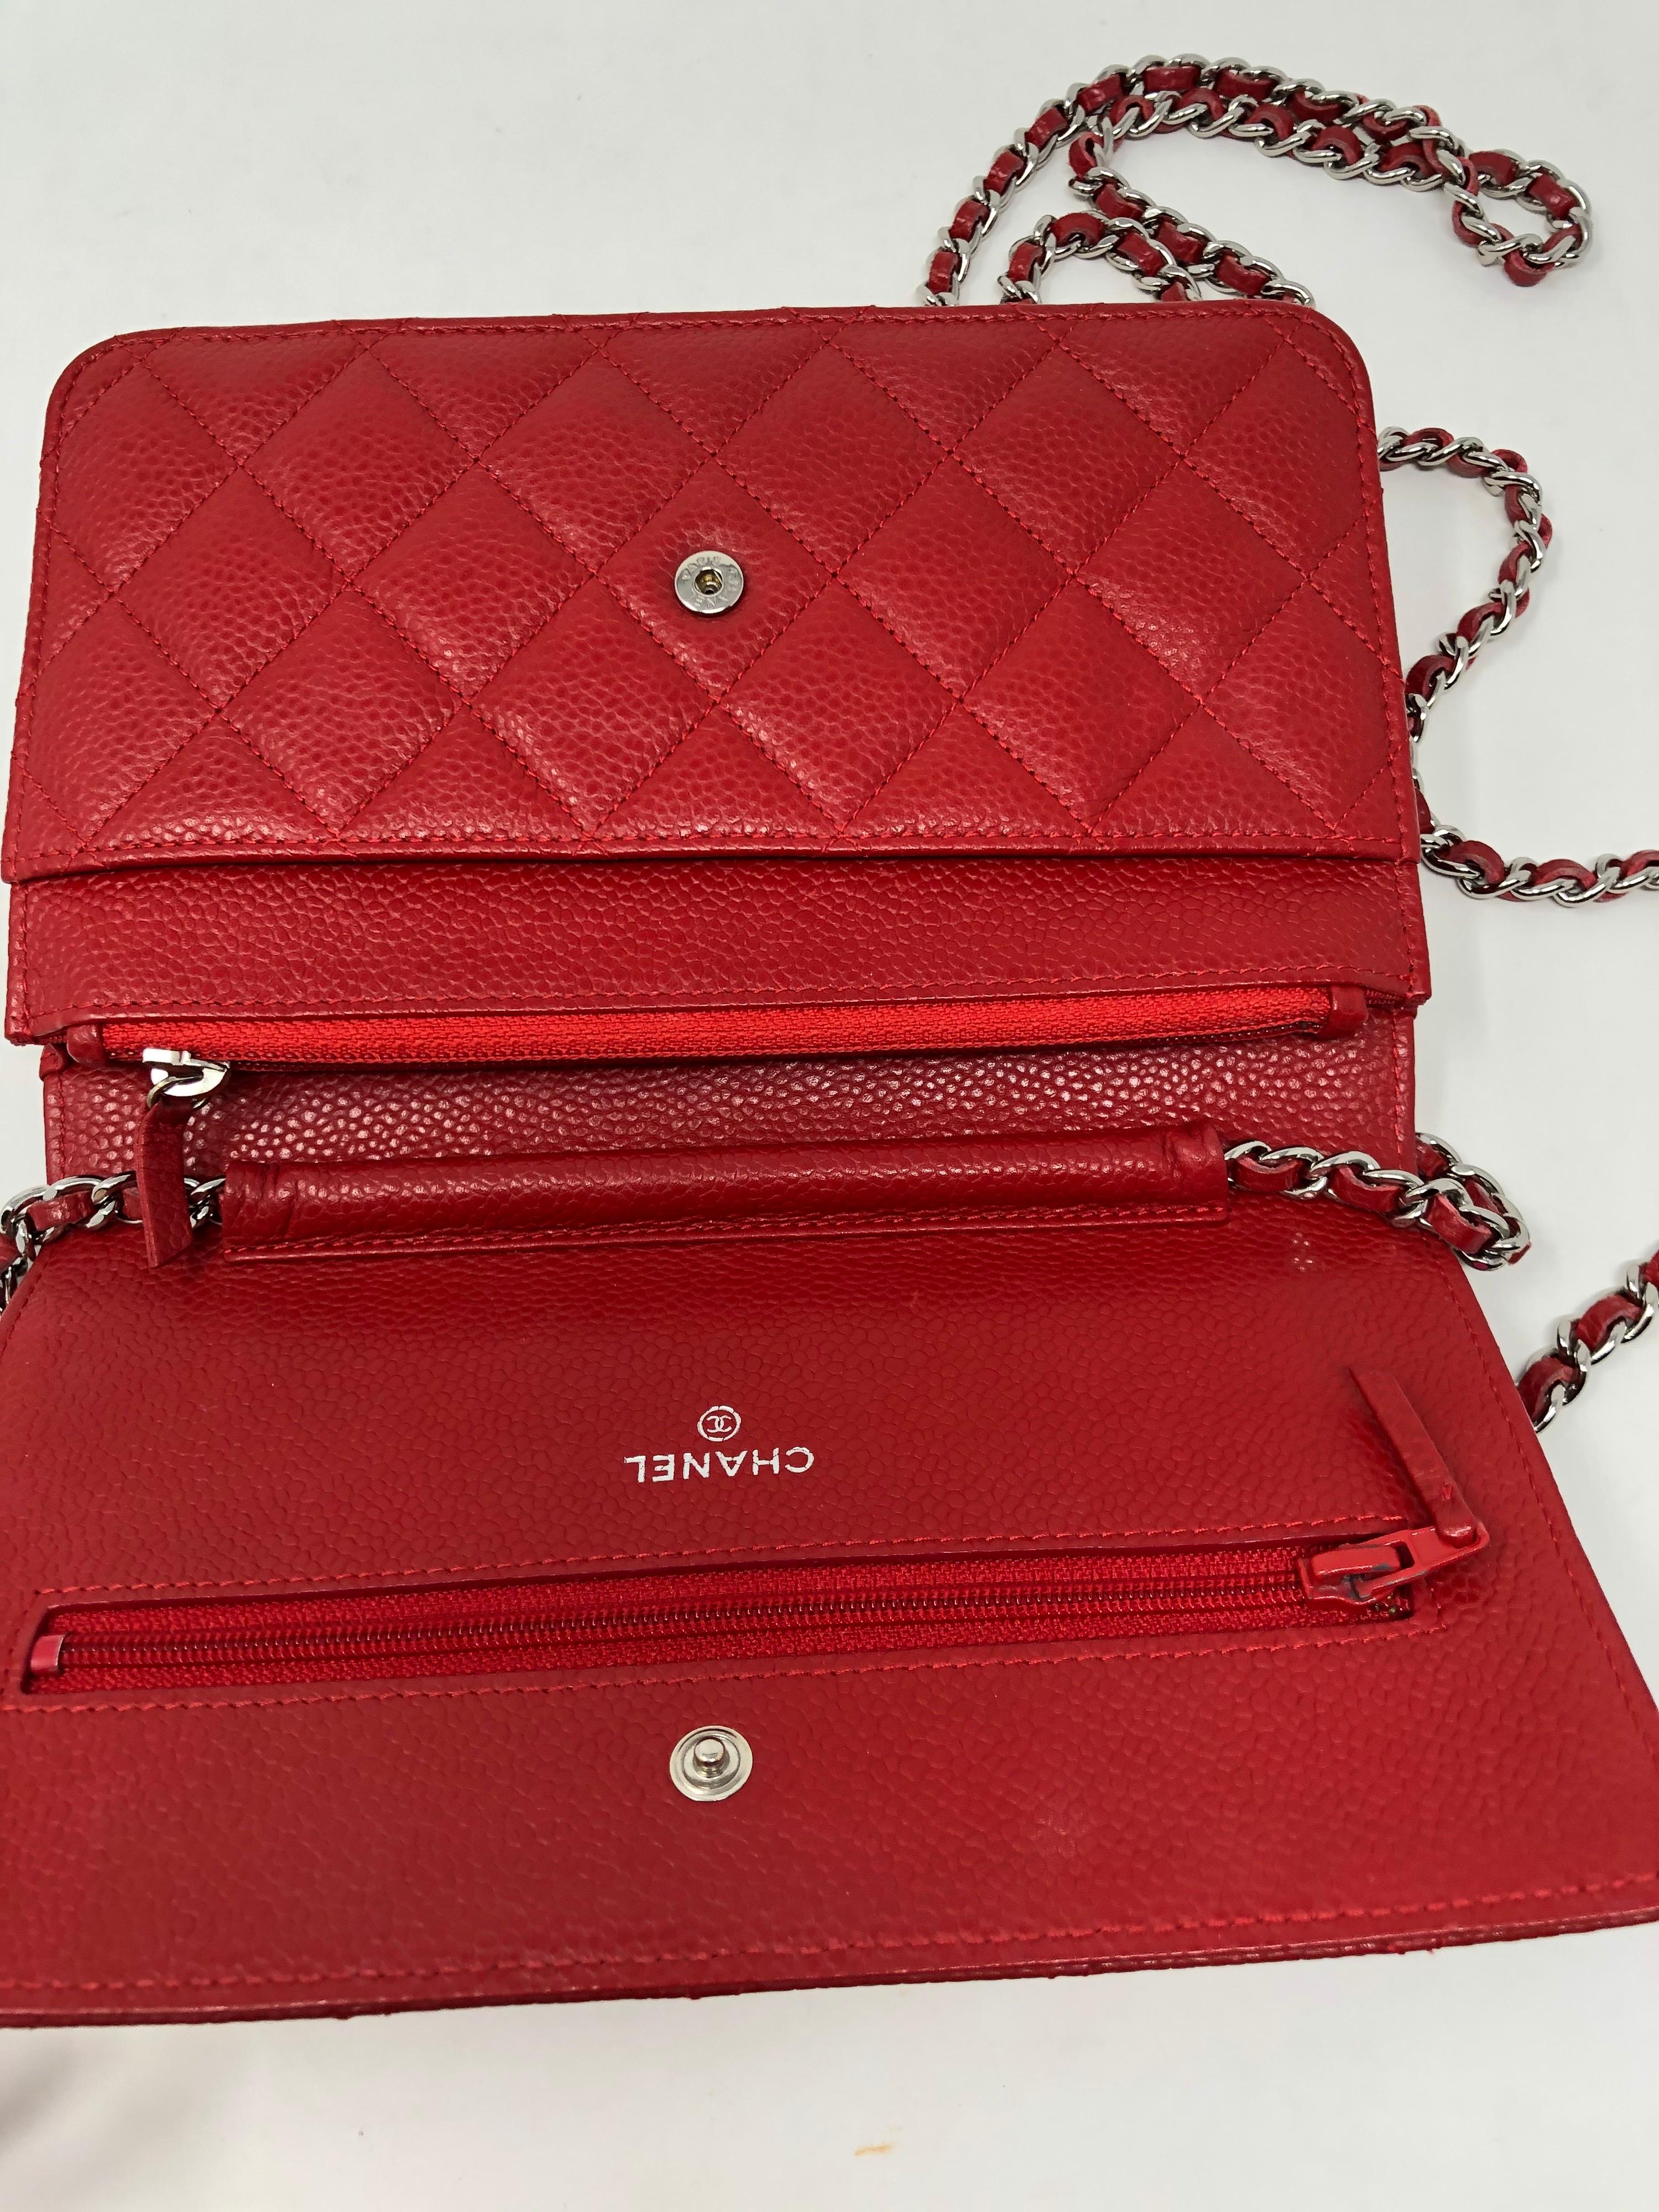 Chanel Red Caviar Wallet On A Chain Bag 1